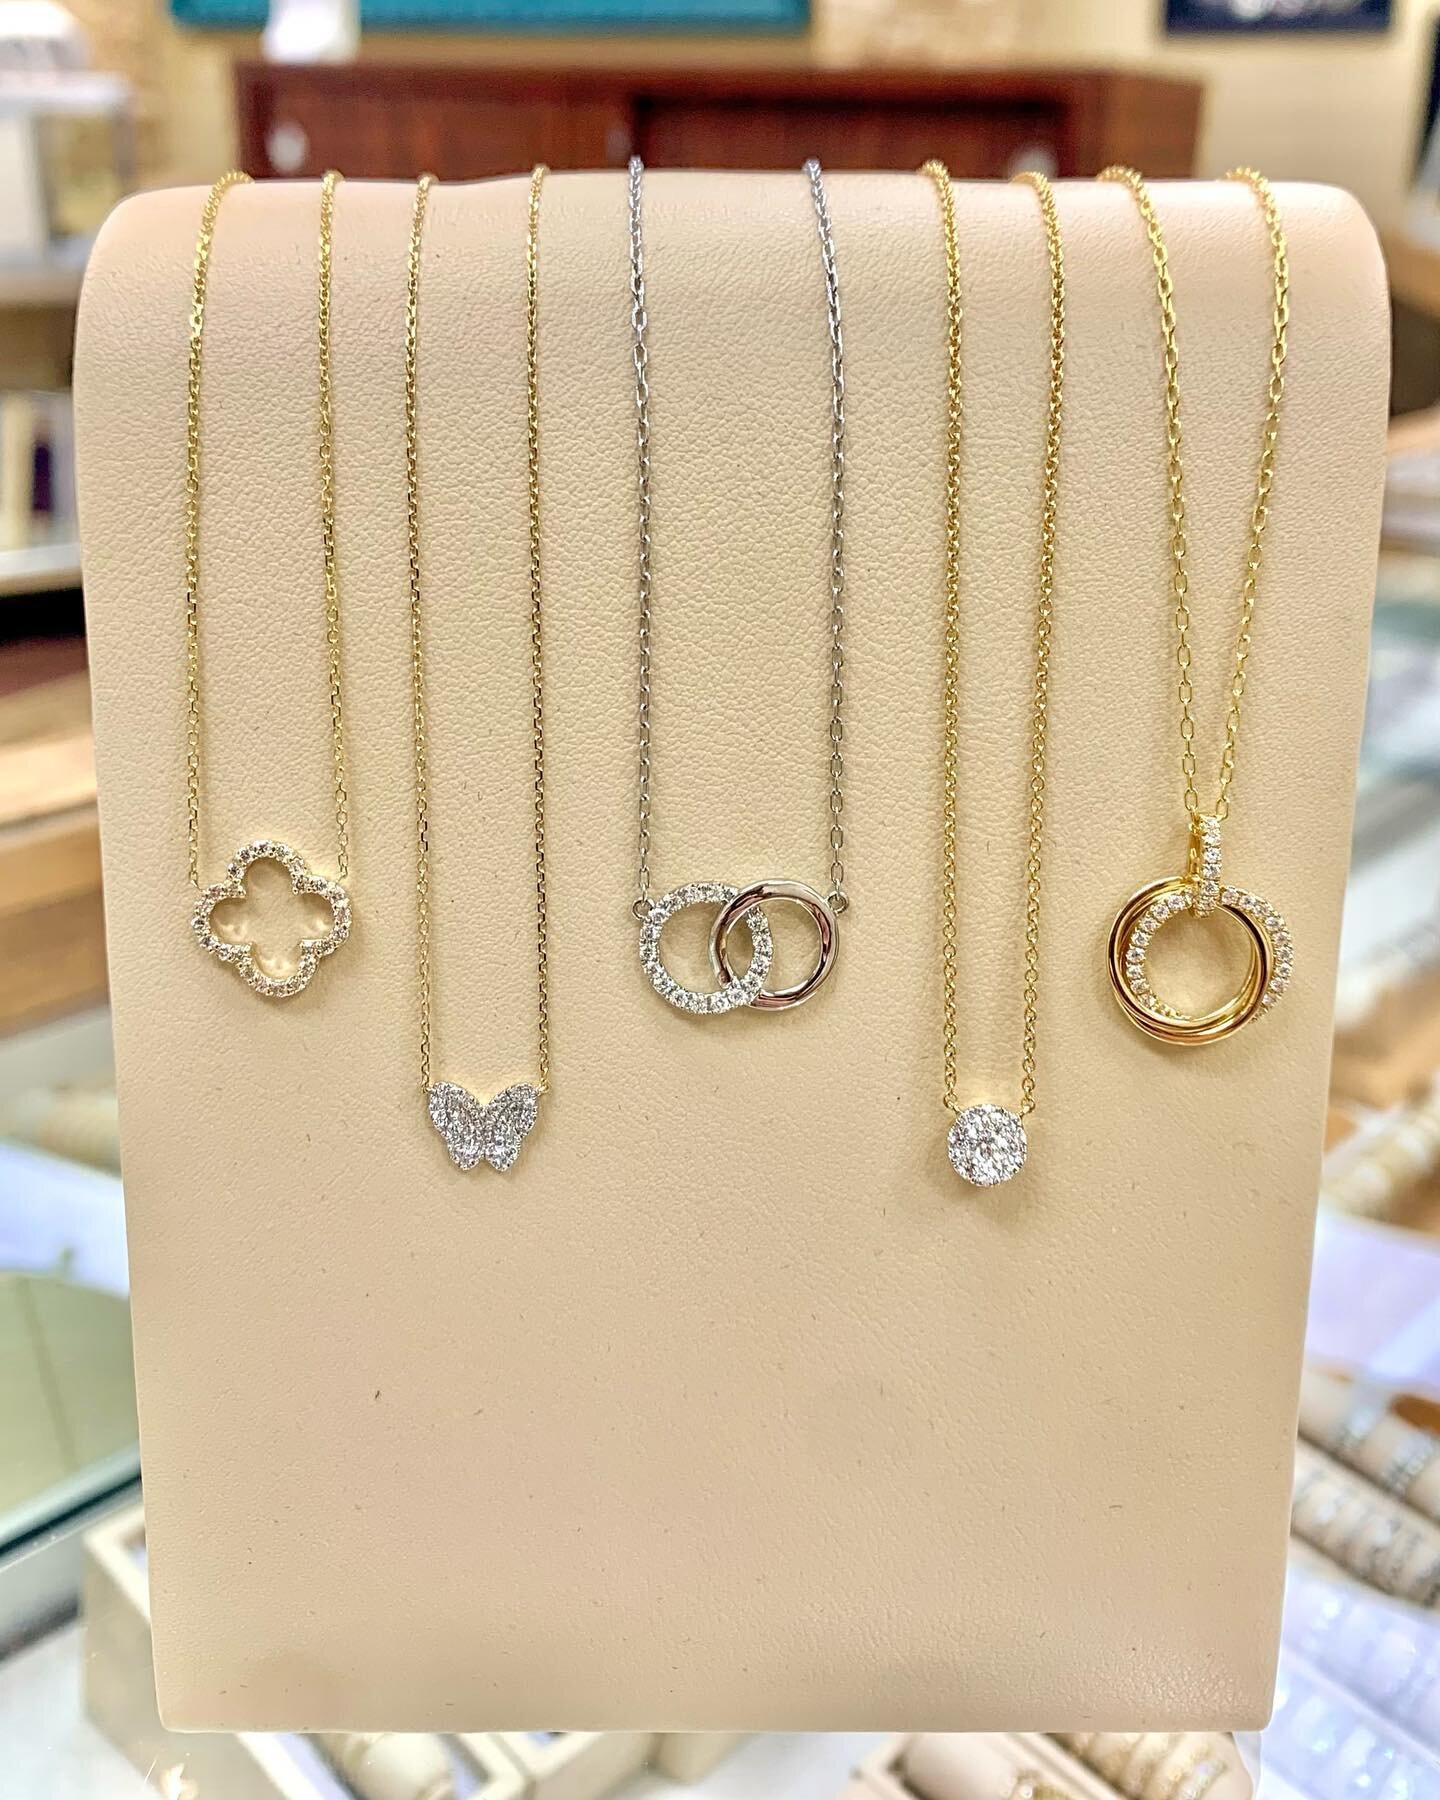 S A L E ‼️ begins May 9-20th and these diamond necklaces will be 20% off!

A beautiful gift💎
Layaways are accepted! 
DM for prices 💌

#maysale #sale #diamonds #ags #jewelry #sale #charlottejeweler #charlotte diamondnecklace #diamondpendant